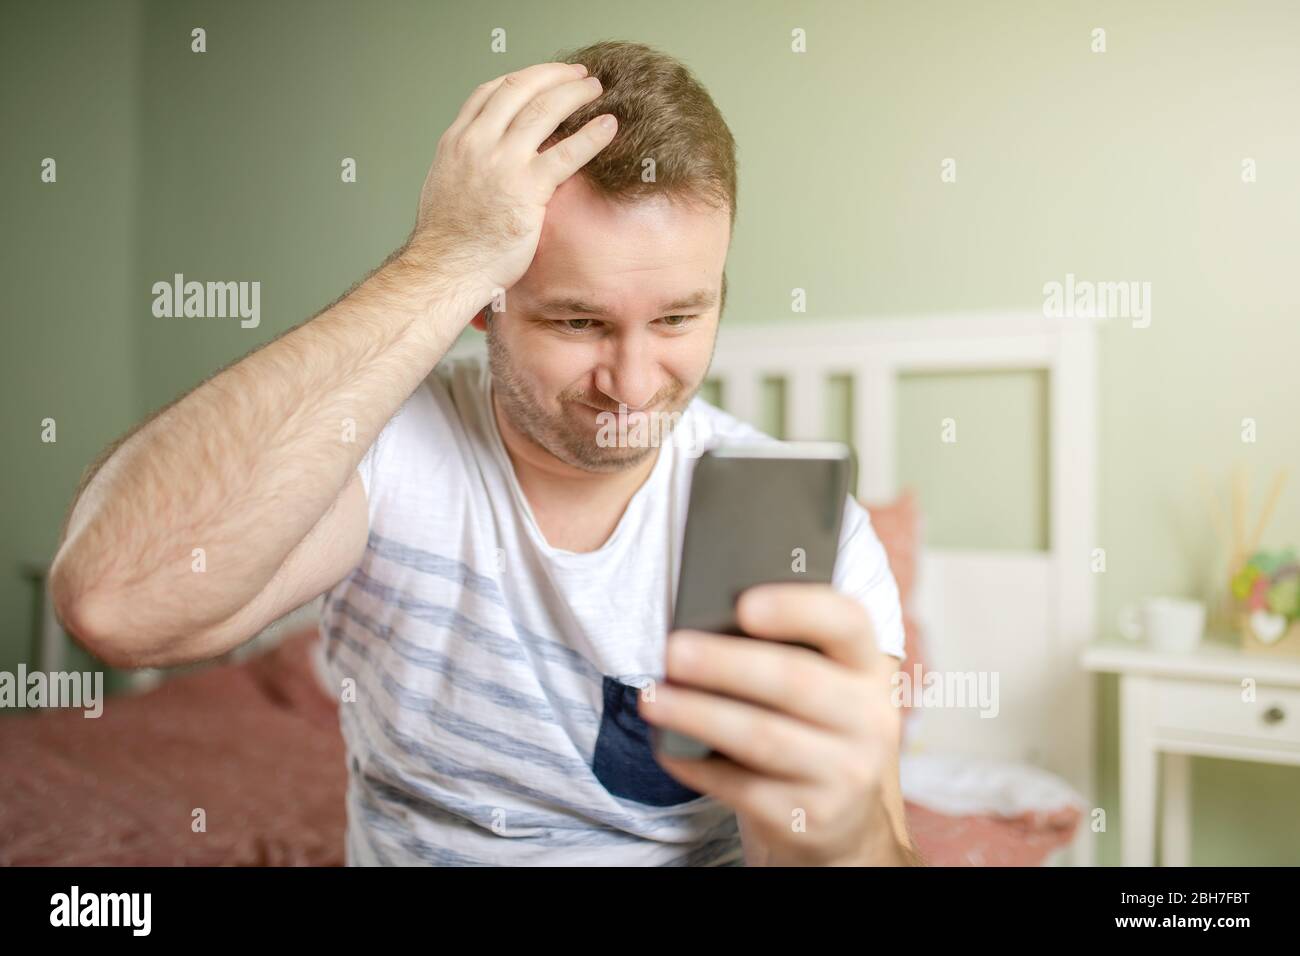 Young man feelling worried while holding phone or smartphone in his hand. One hand in his head. Big troble concept face. Stock Photo